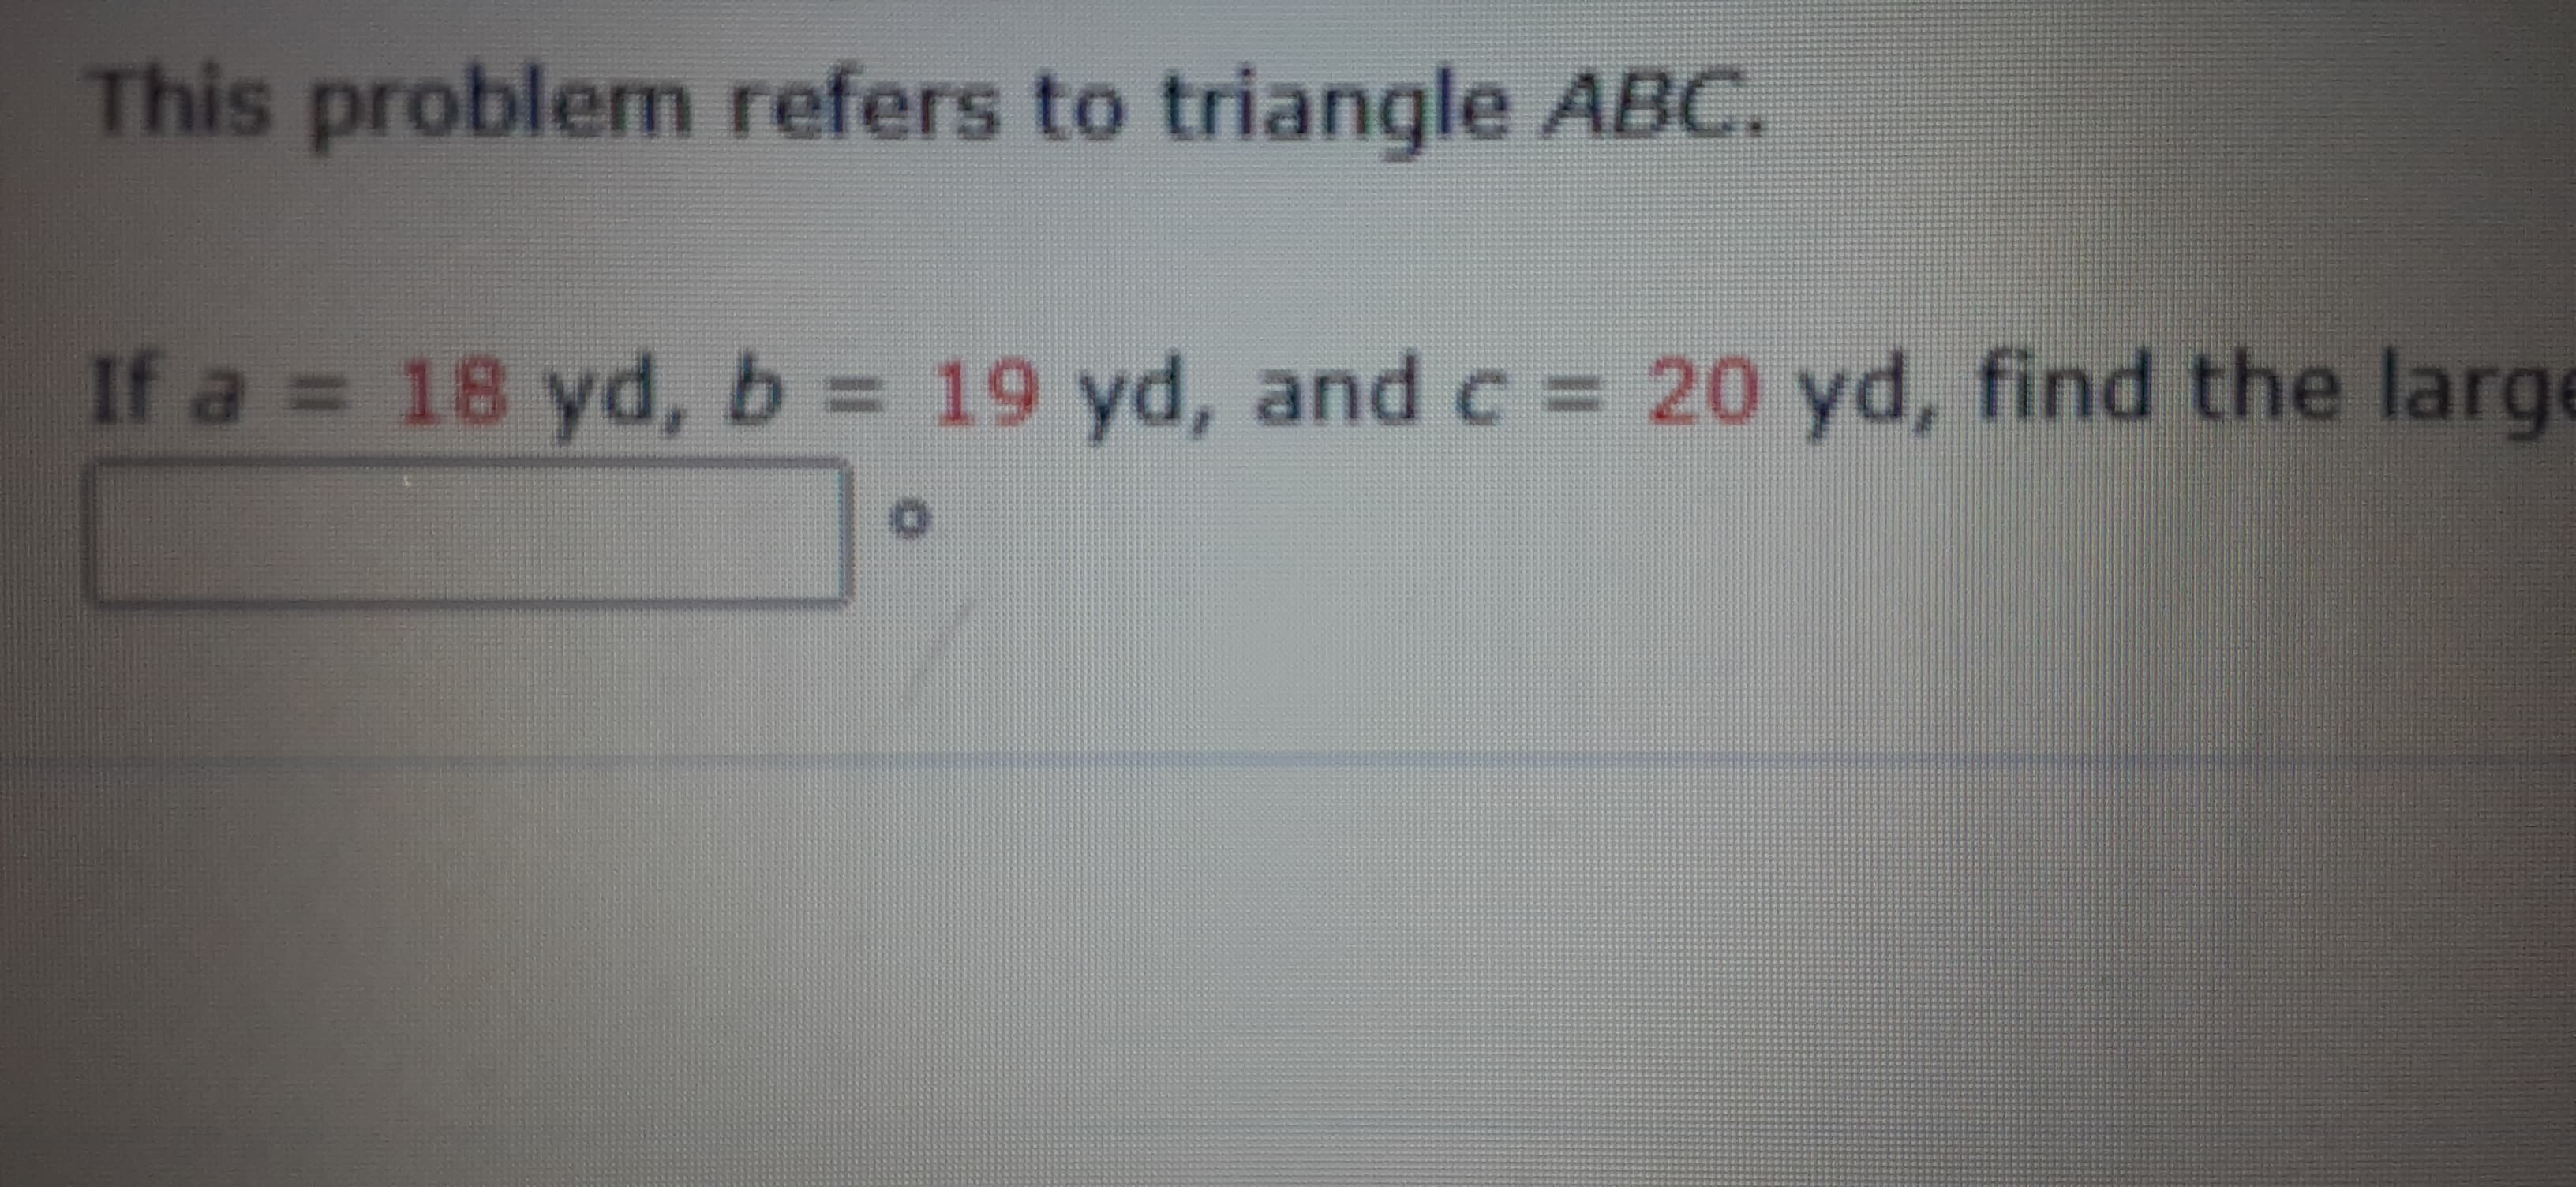 This problem refers to triangle ABC.
If a = 18 yd, b = 19 yd, and c = 20 yd, find the larg
